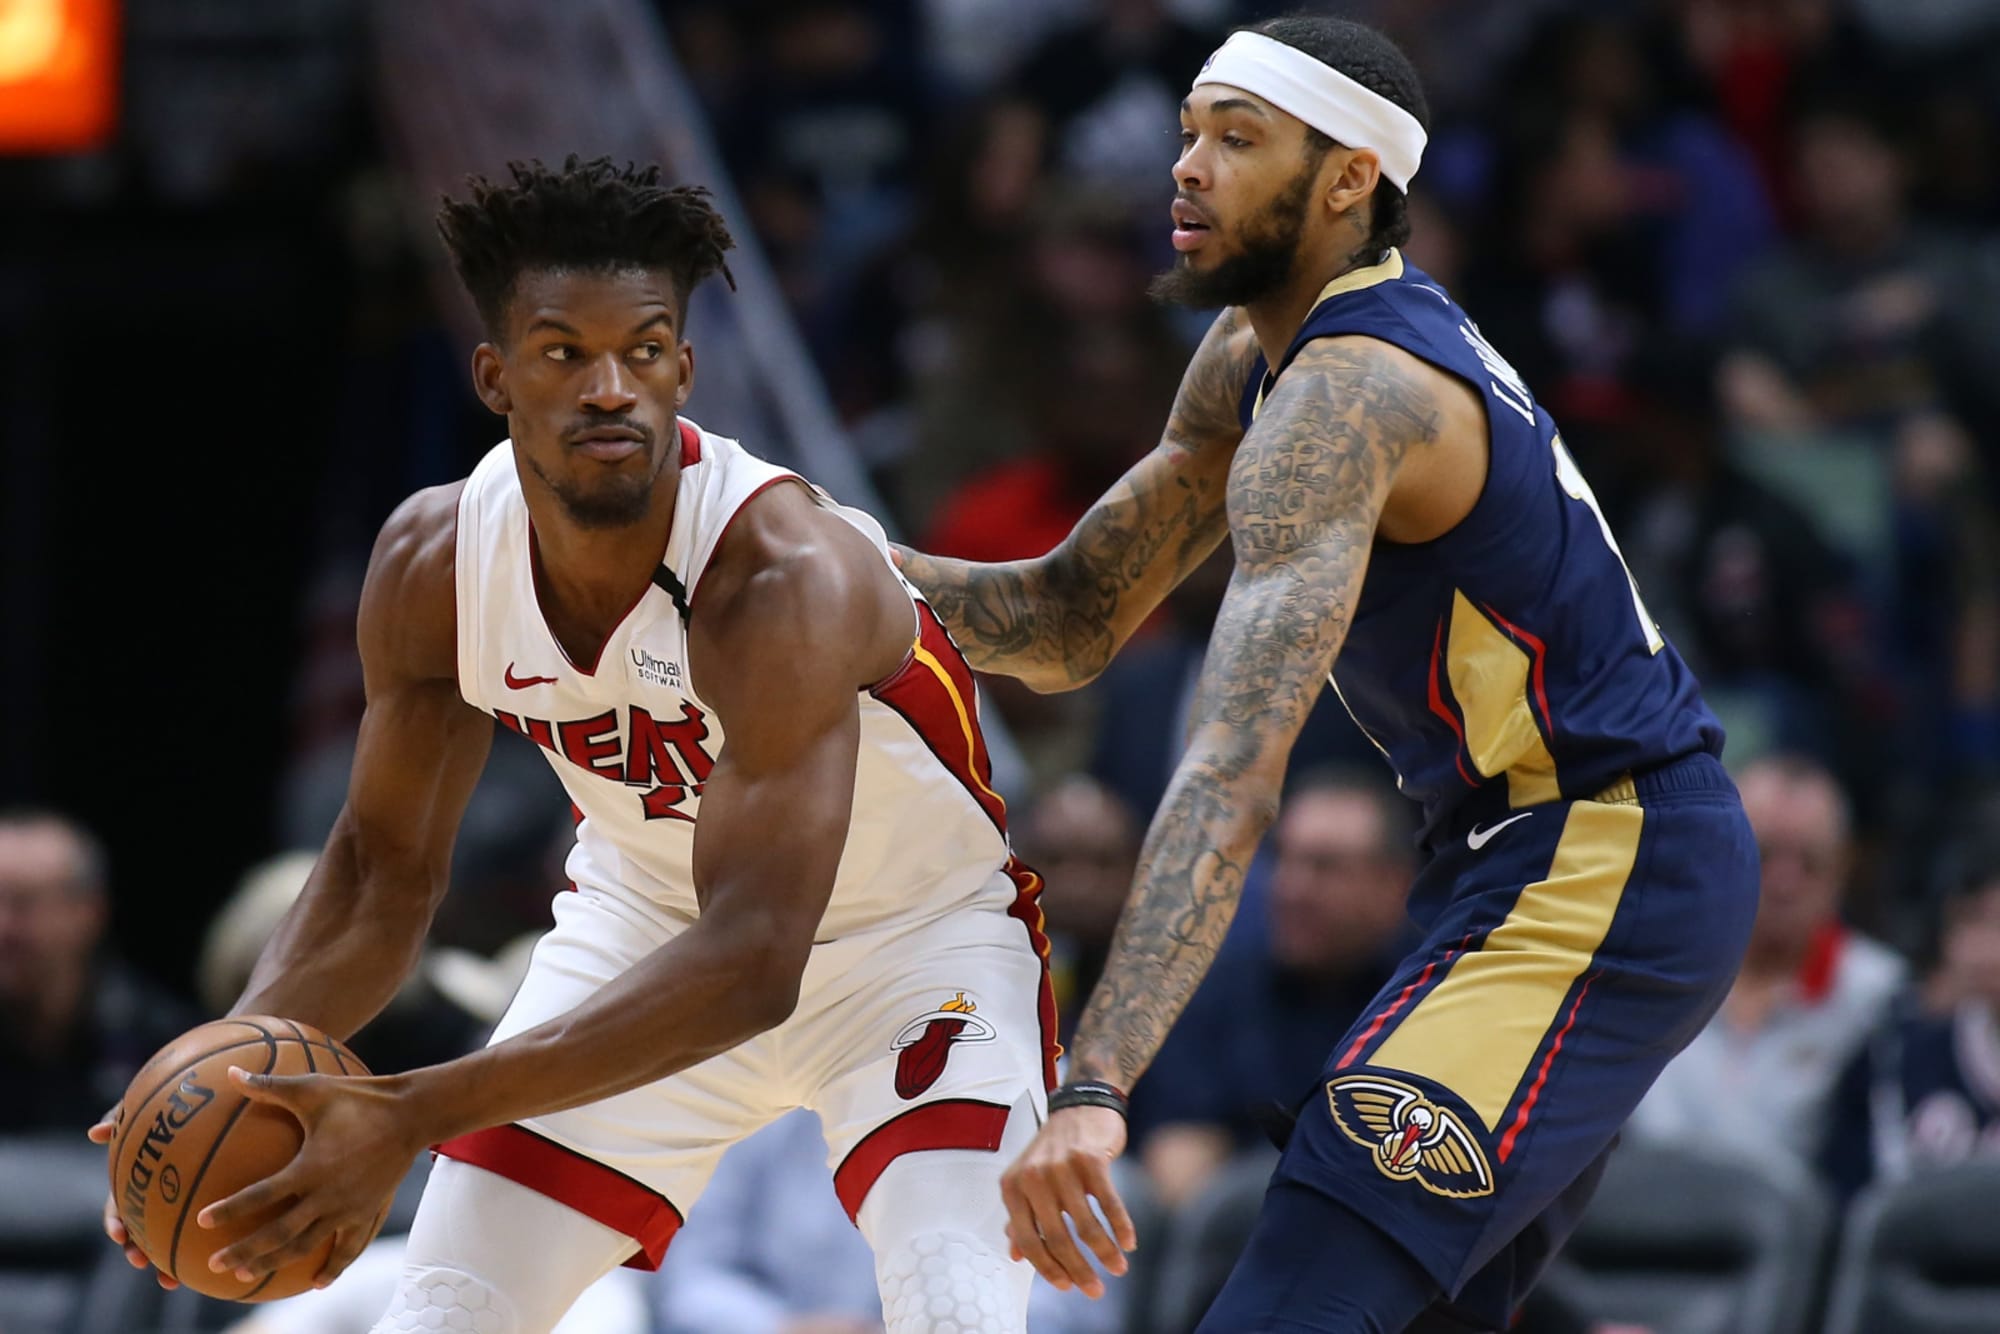 New Orleans Pelicans: Following the Miami Heat's Zone Defense in 2021